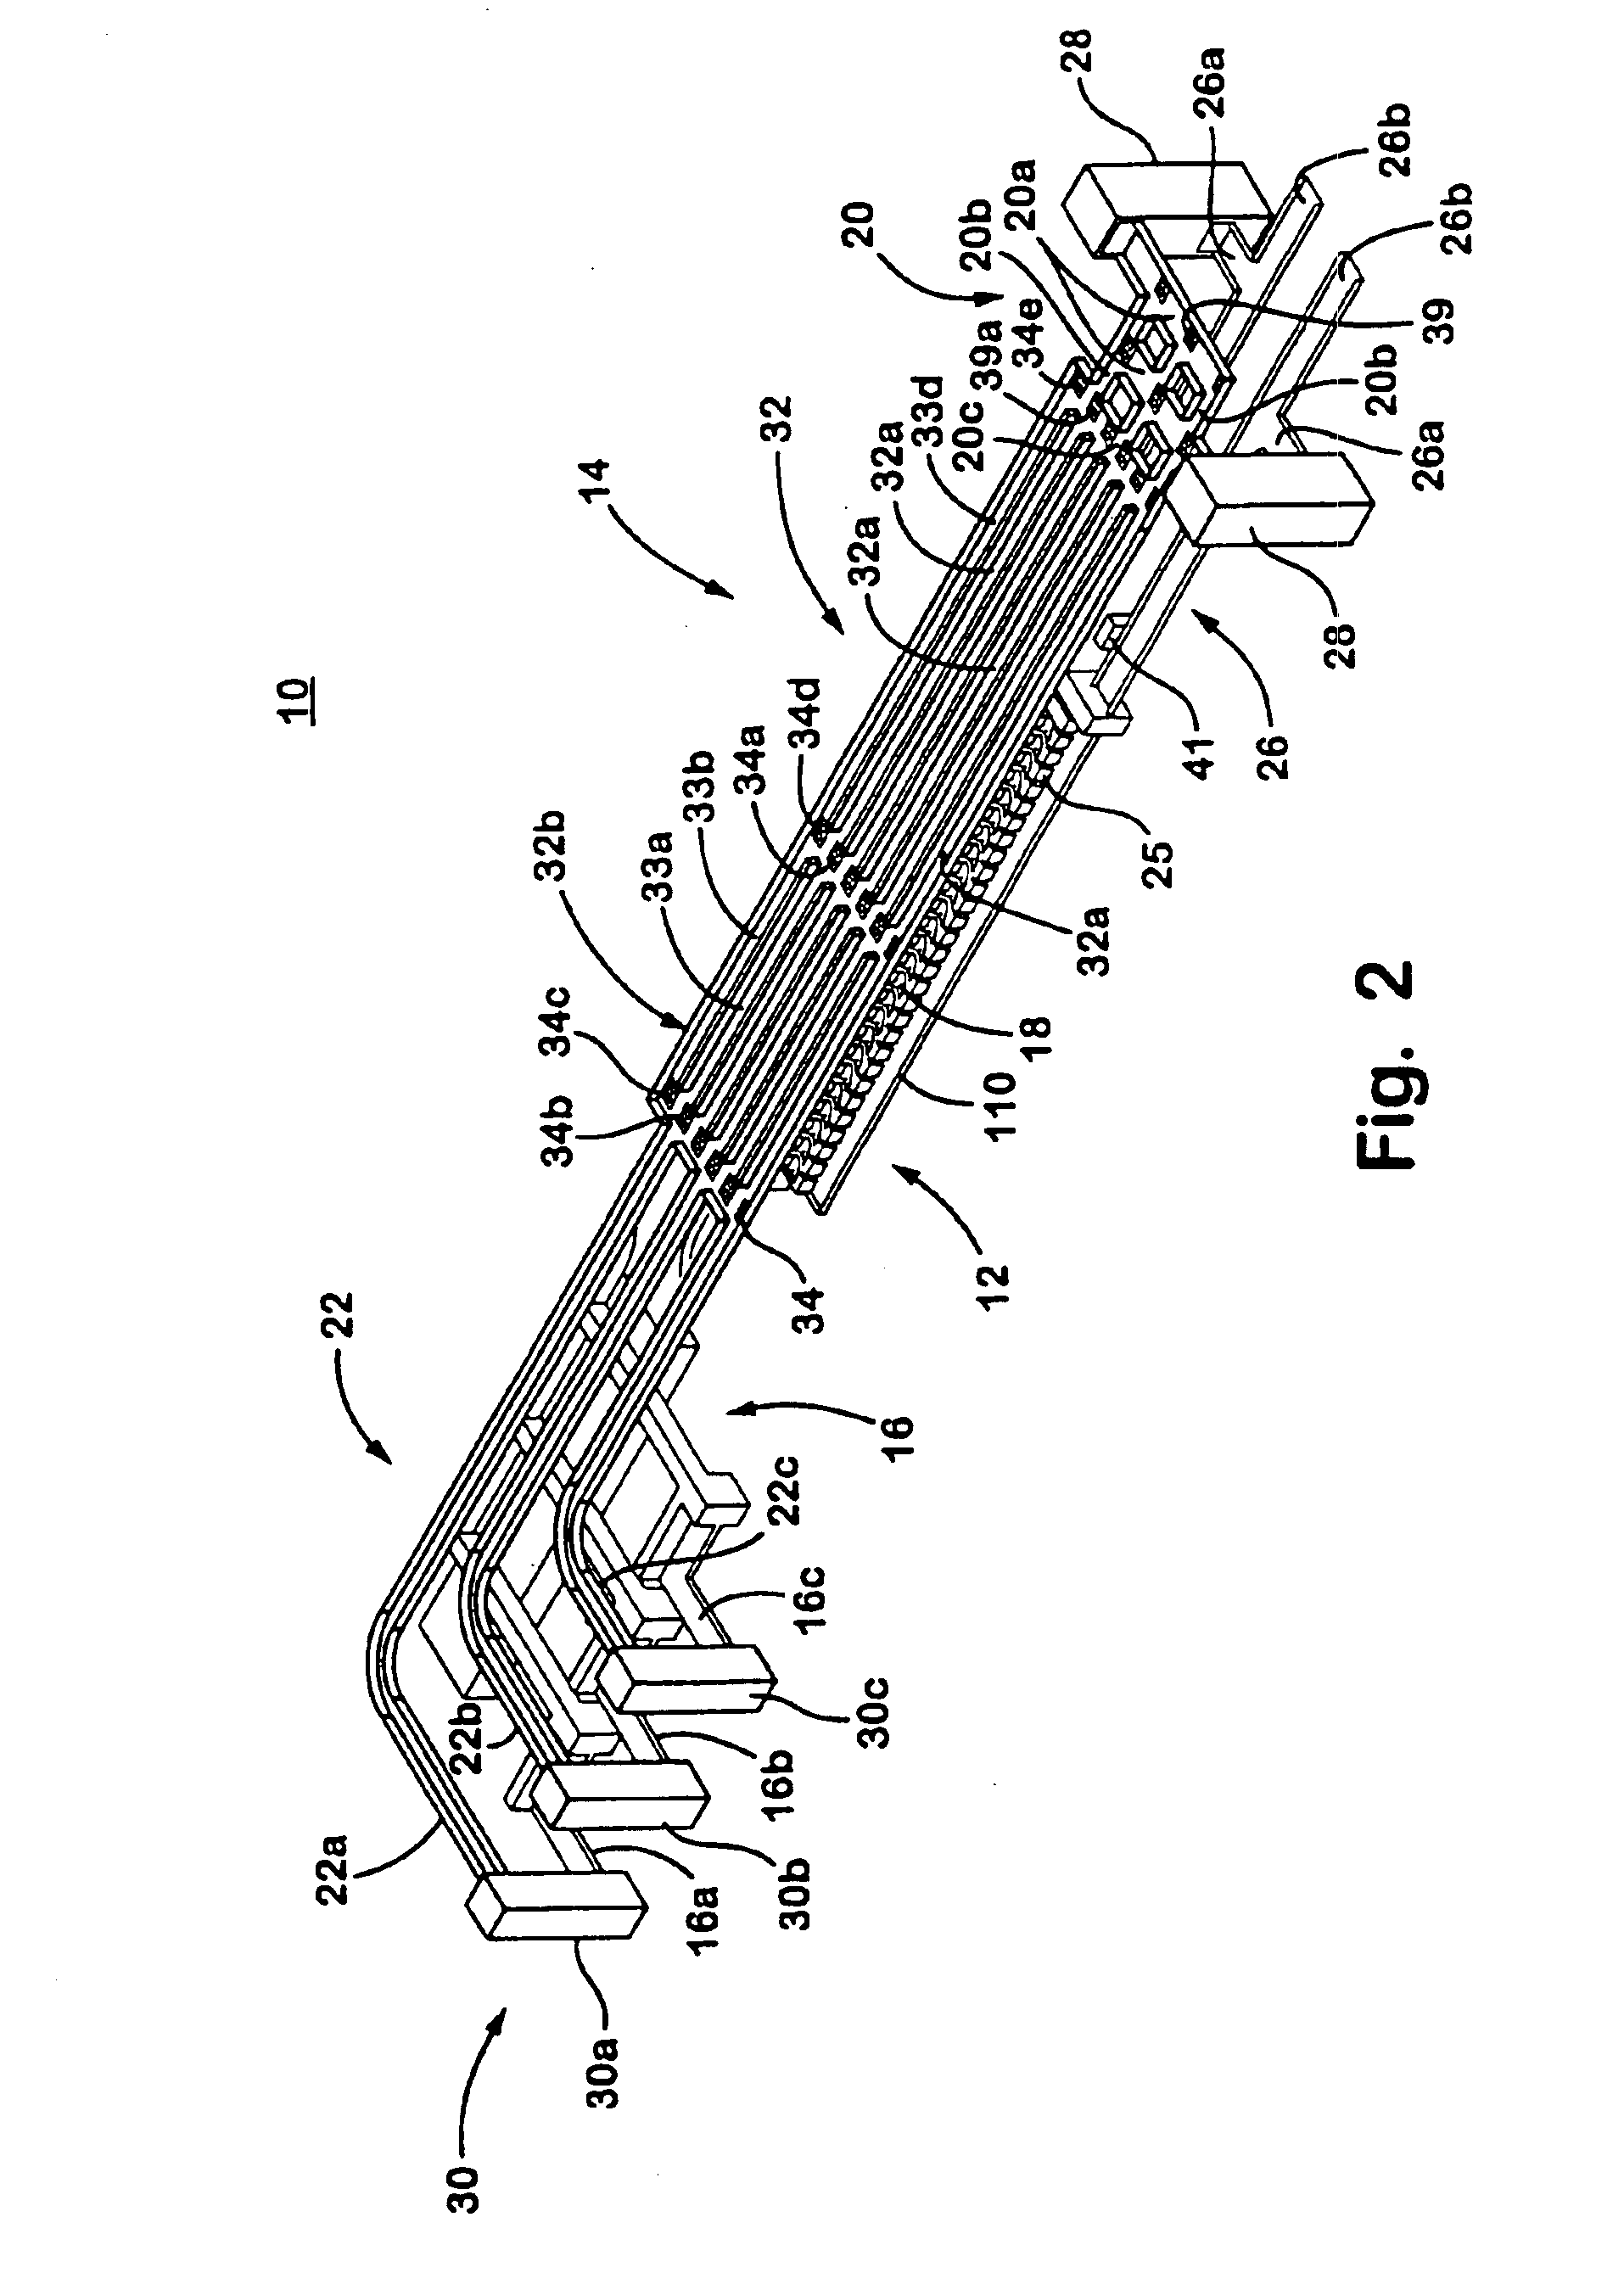 Delivery point sequencing mail sorting system with flat mail capability